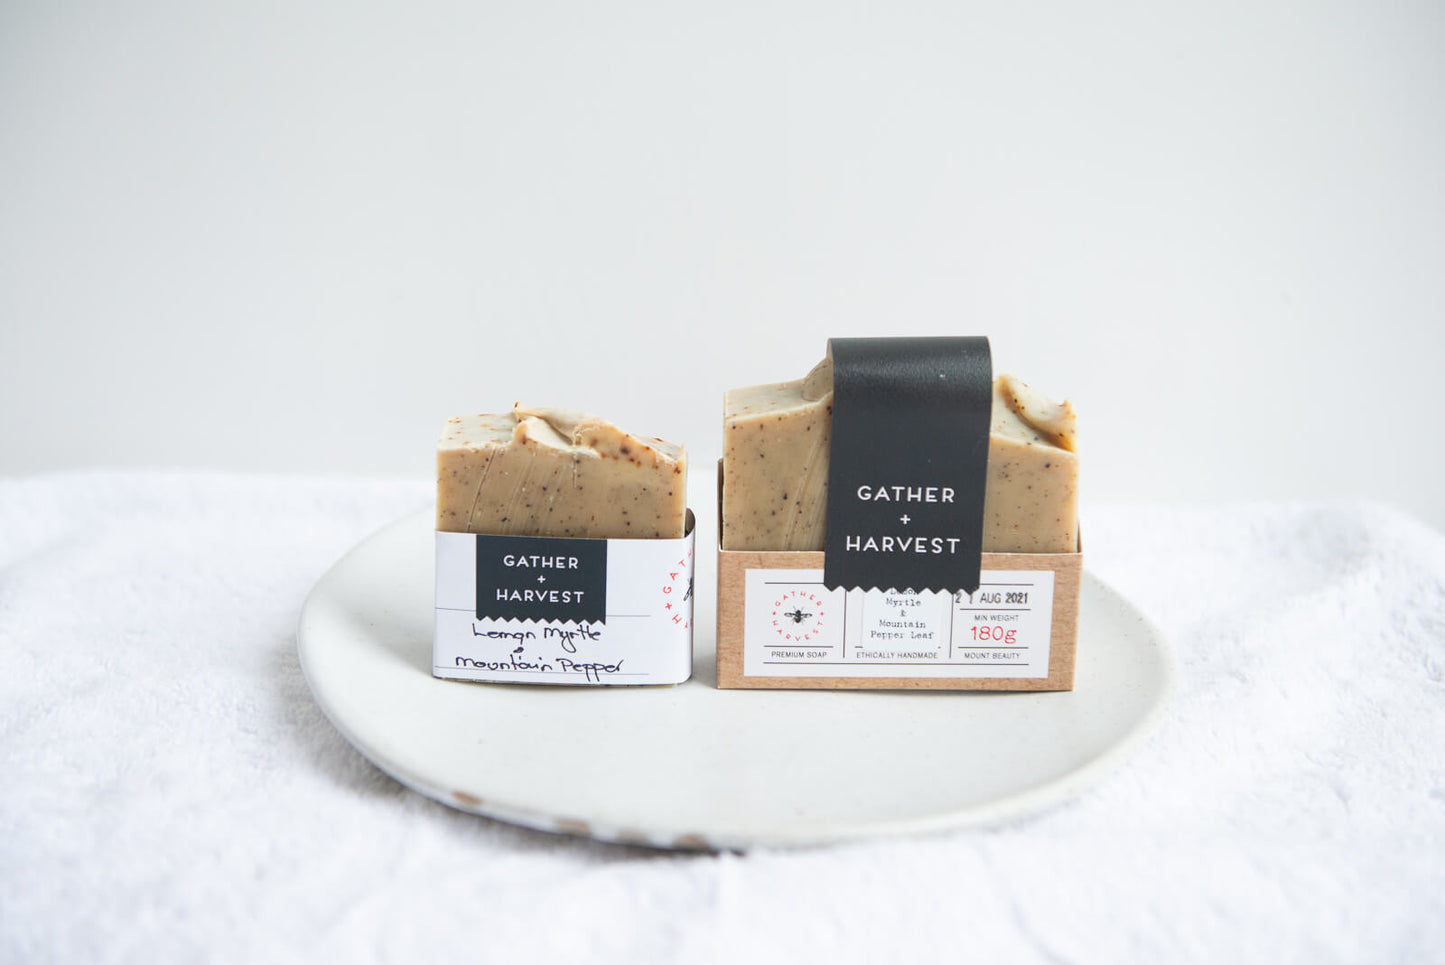 This handmade natural soap with  Lemon Myrtle & Mountain Pepper Leaf deeply nourishes your skin